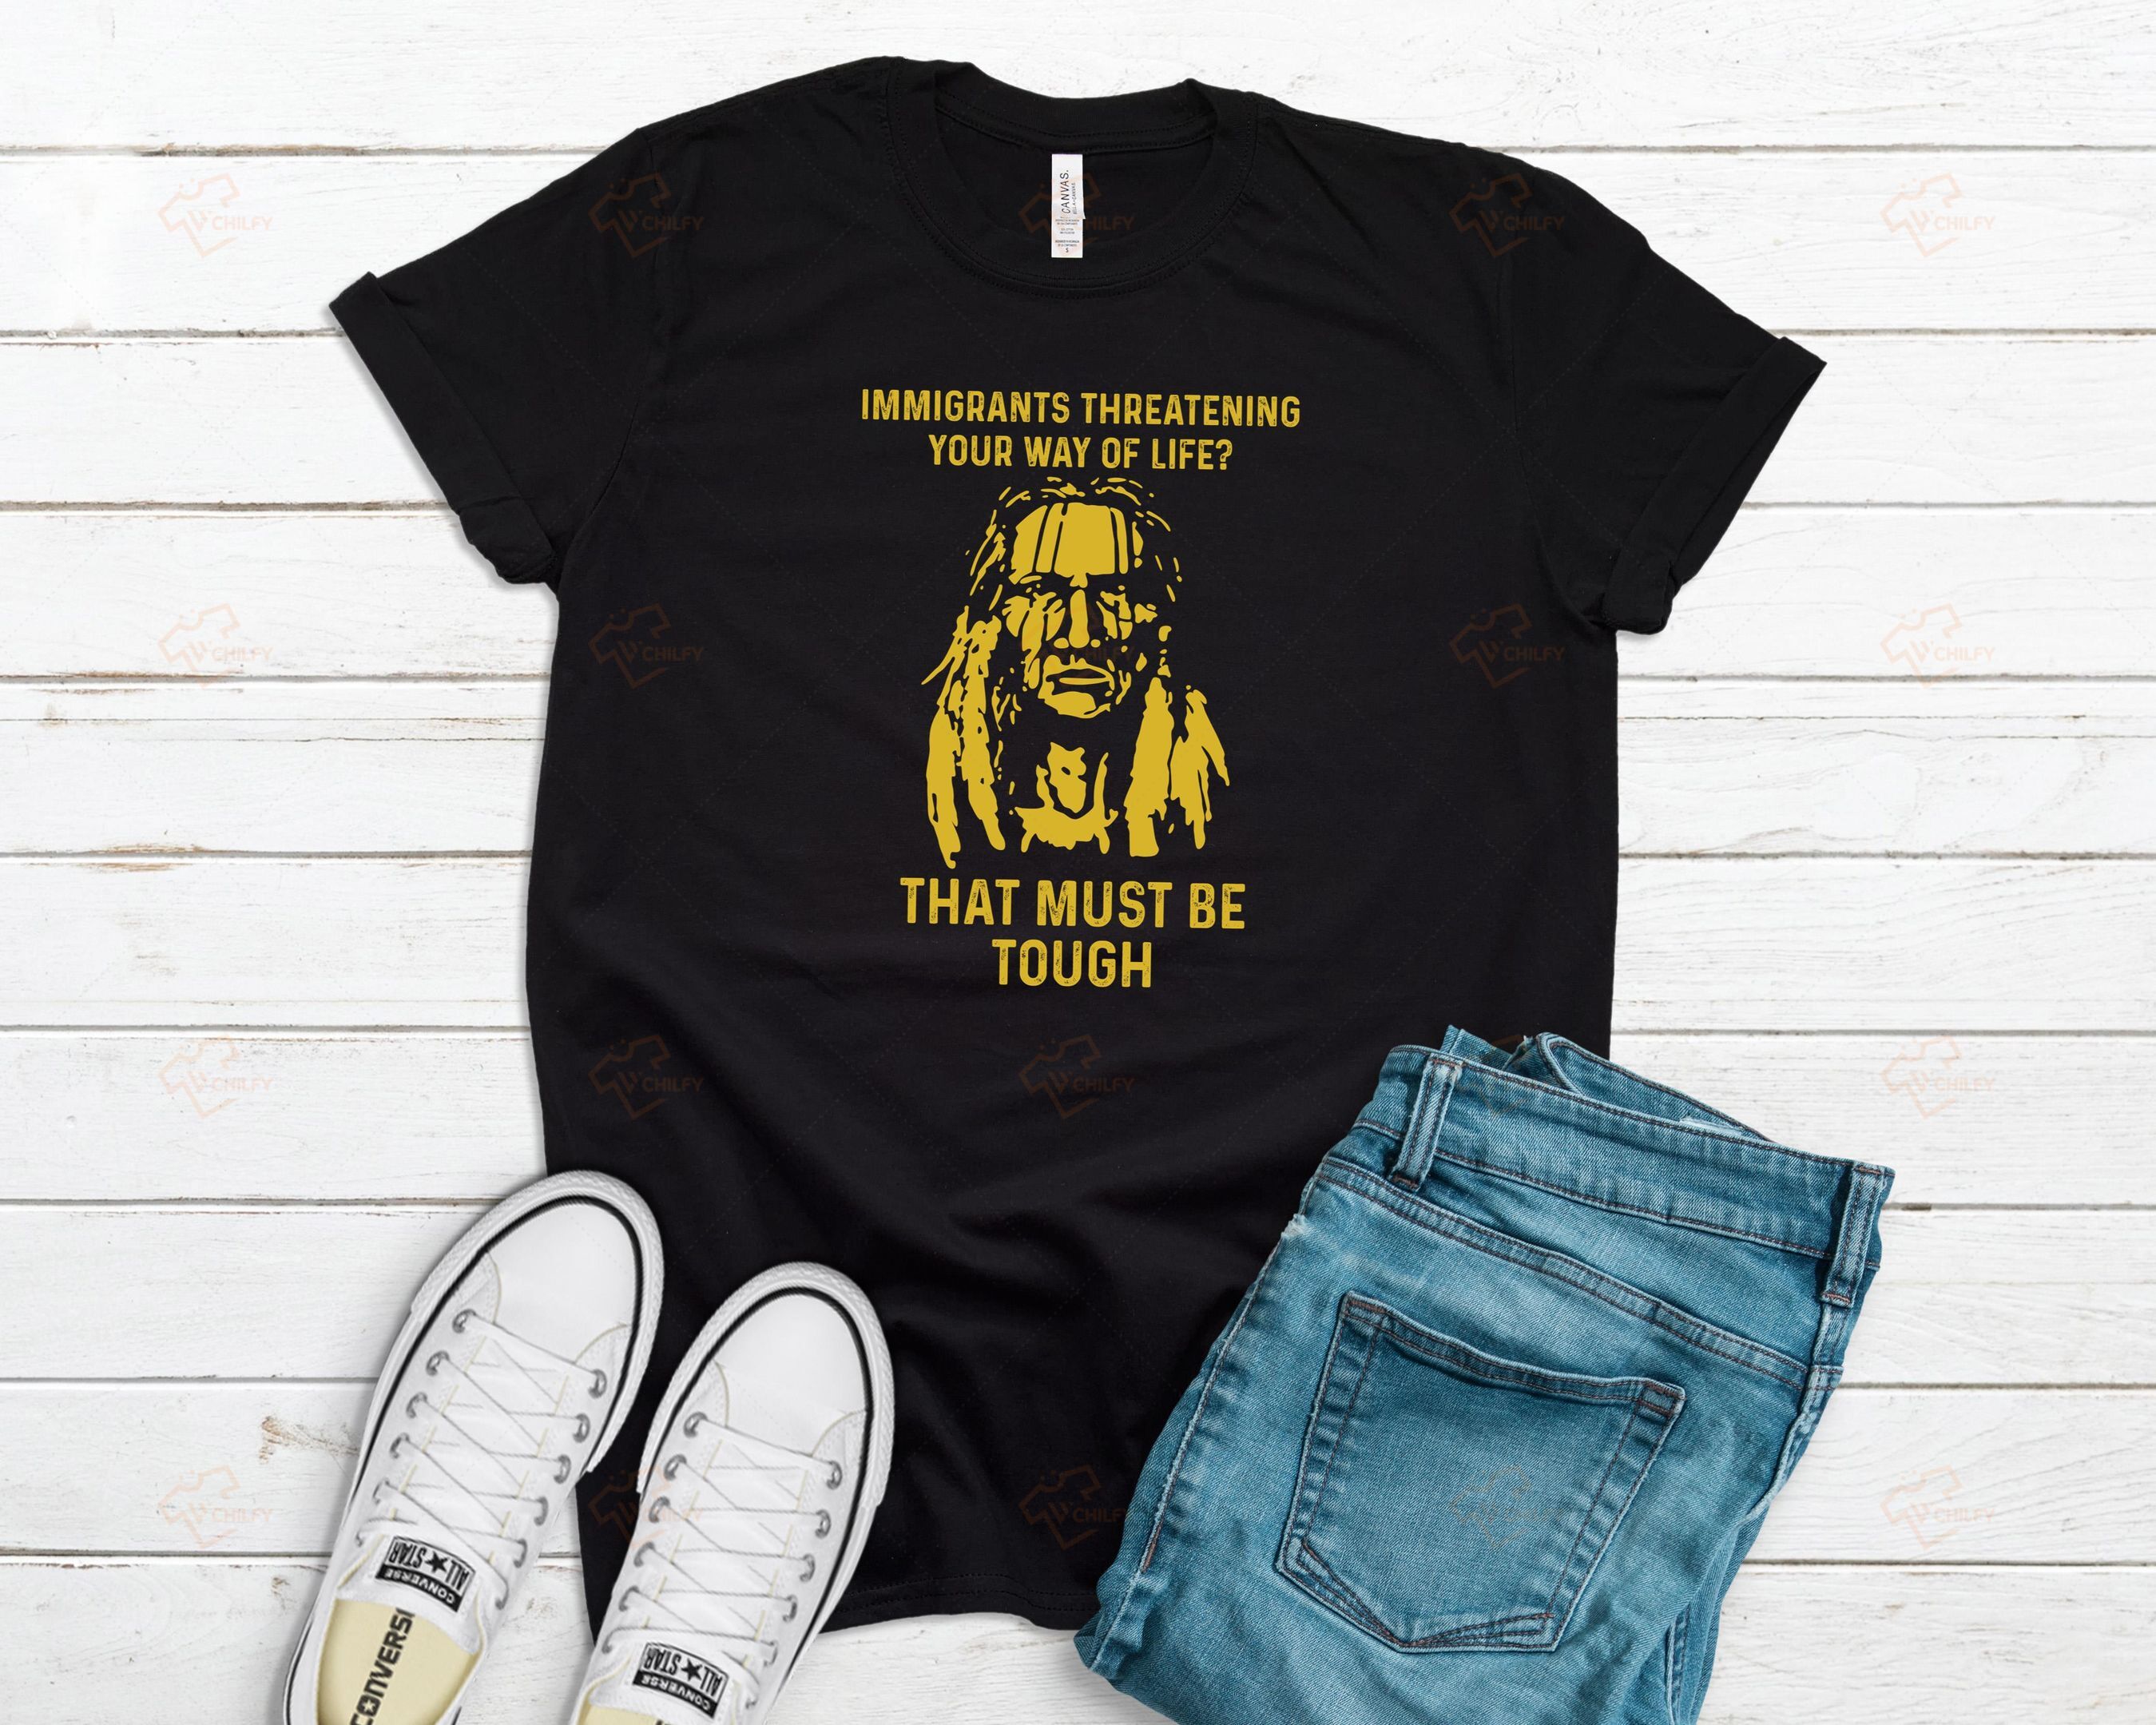 immigrants threatening your way of life that must be tough shirt, badass Native t shirt, Native American shirt, gift for Indigenous people